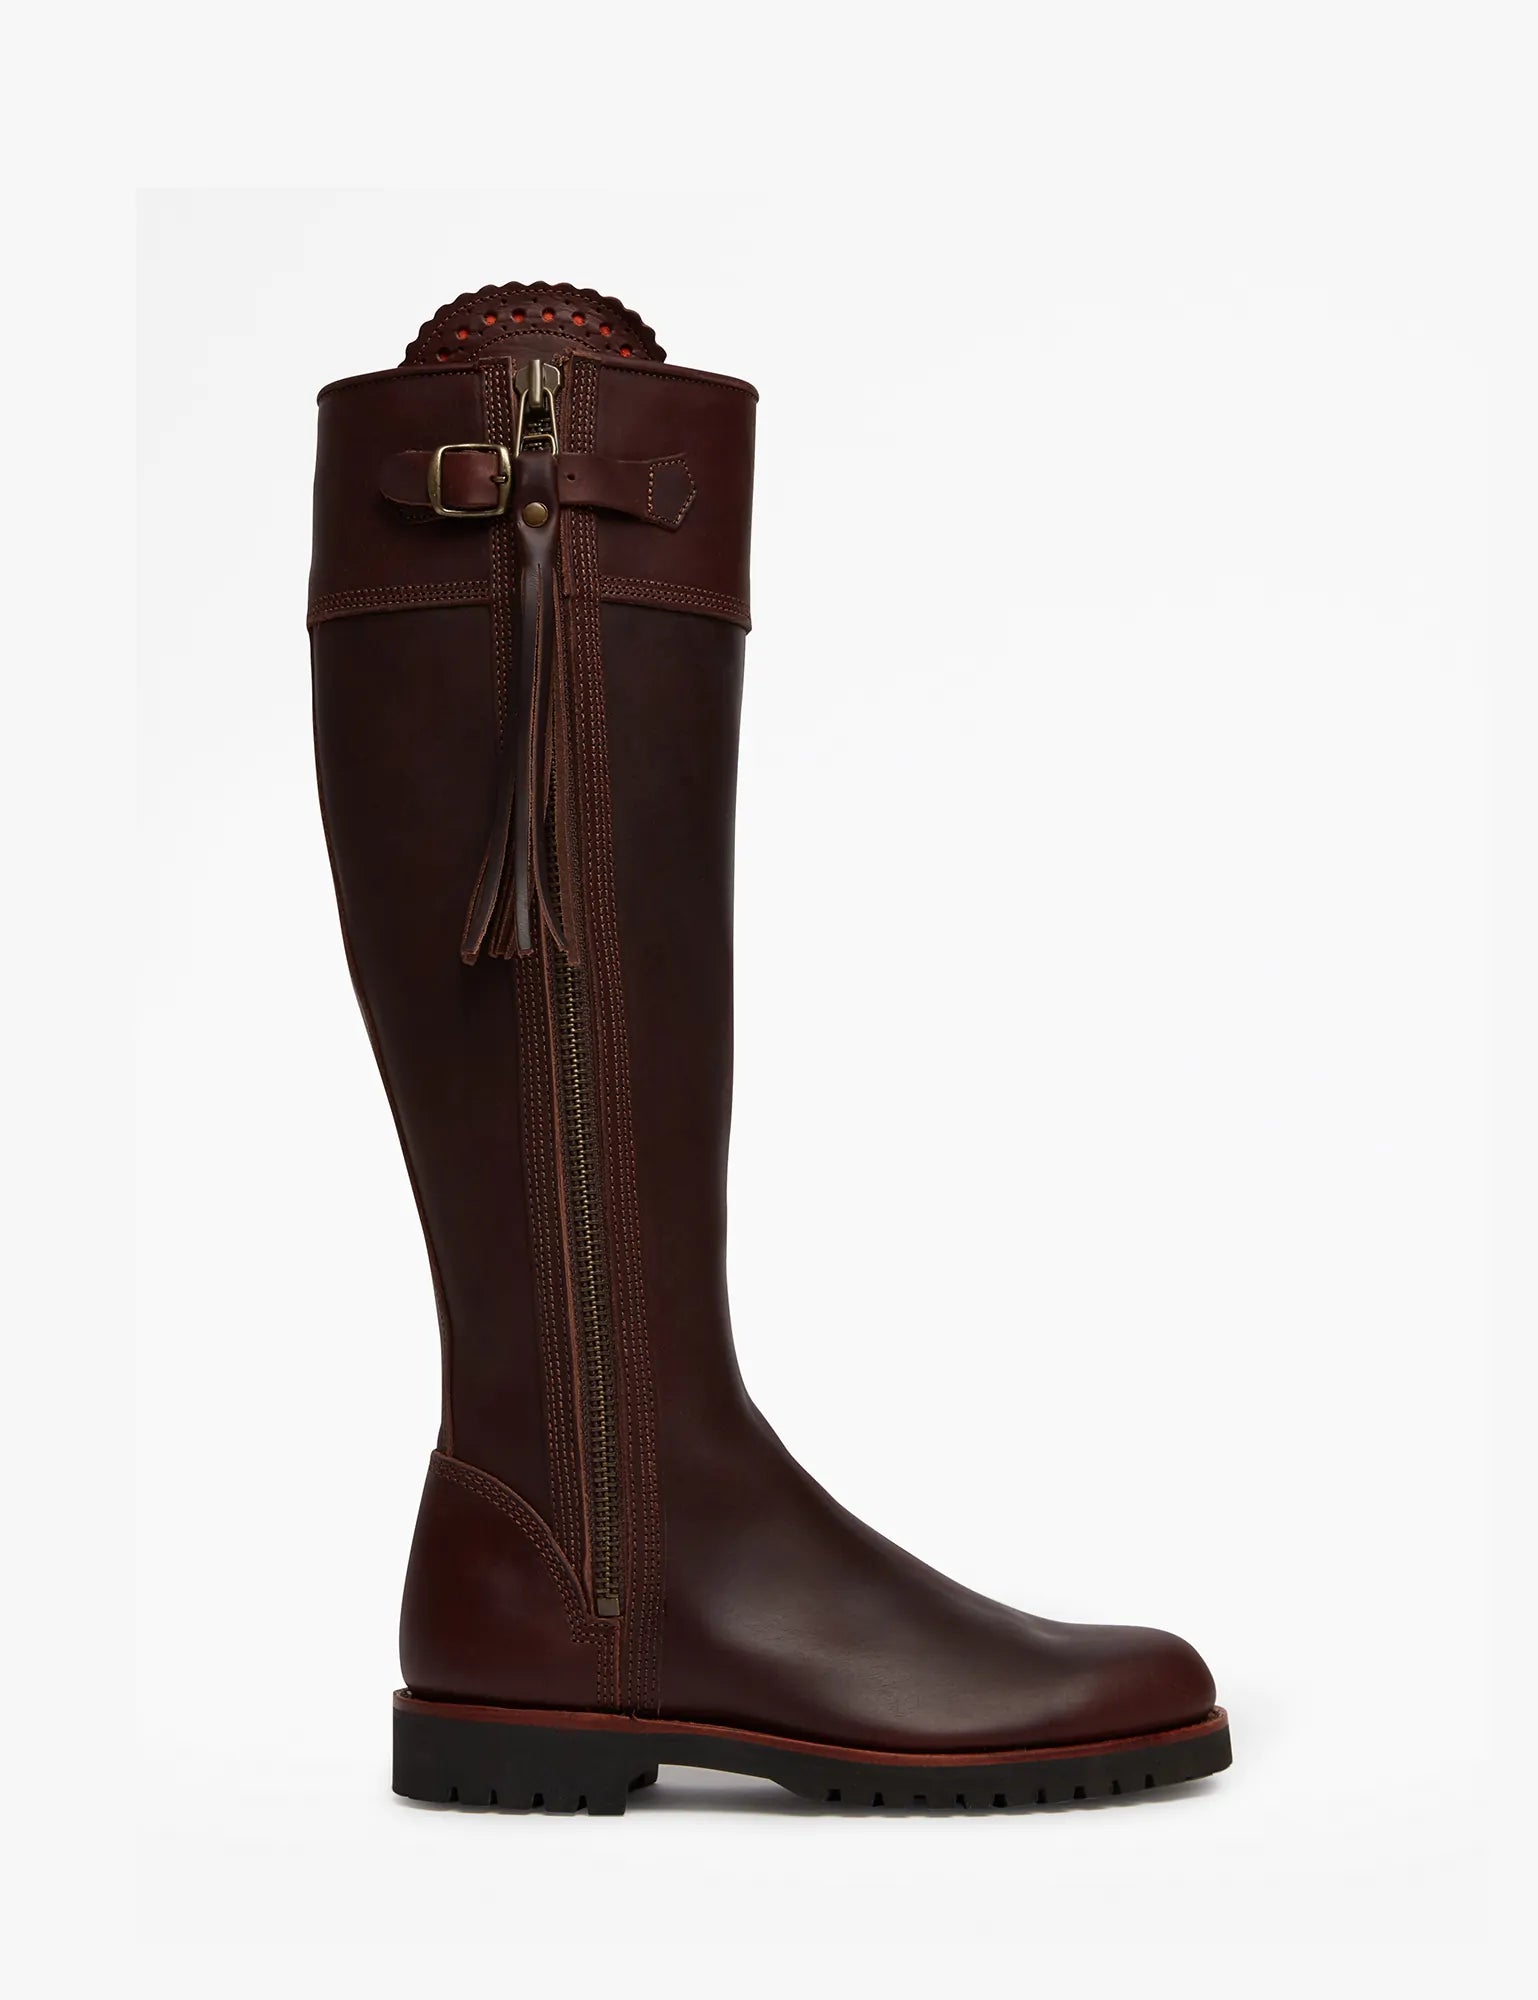 Penelope Chilvers Long Tassel Boot Leather-Boots-Penelope Chilvers-Conker-36-Manhattan Saddlery